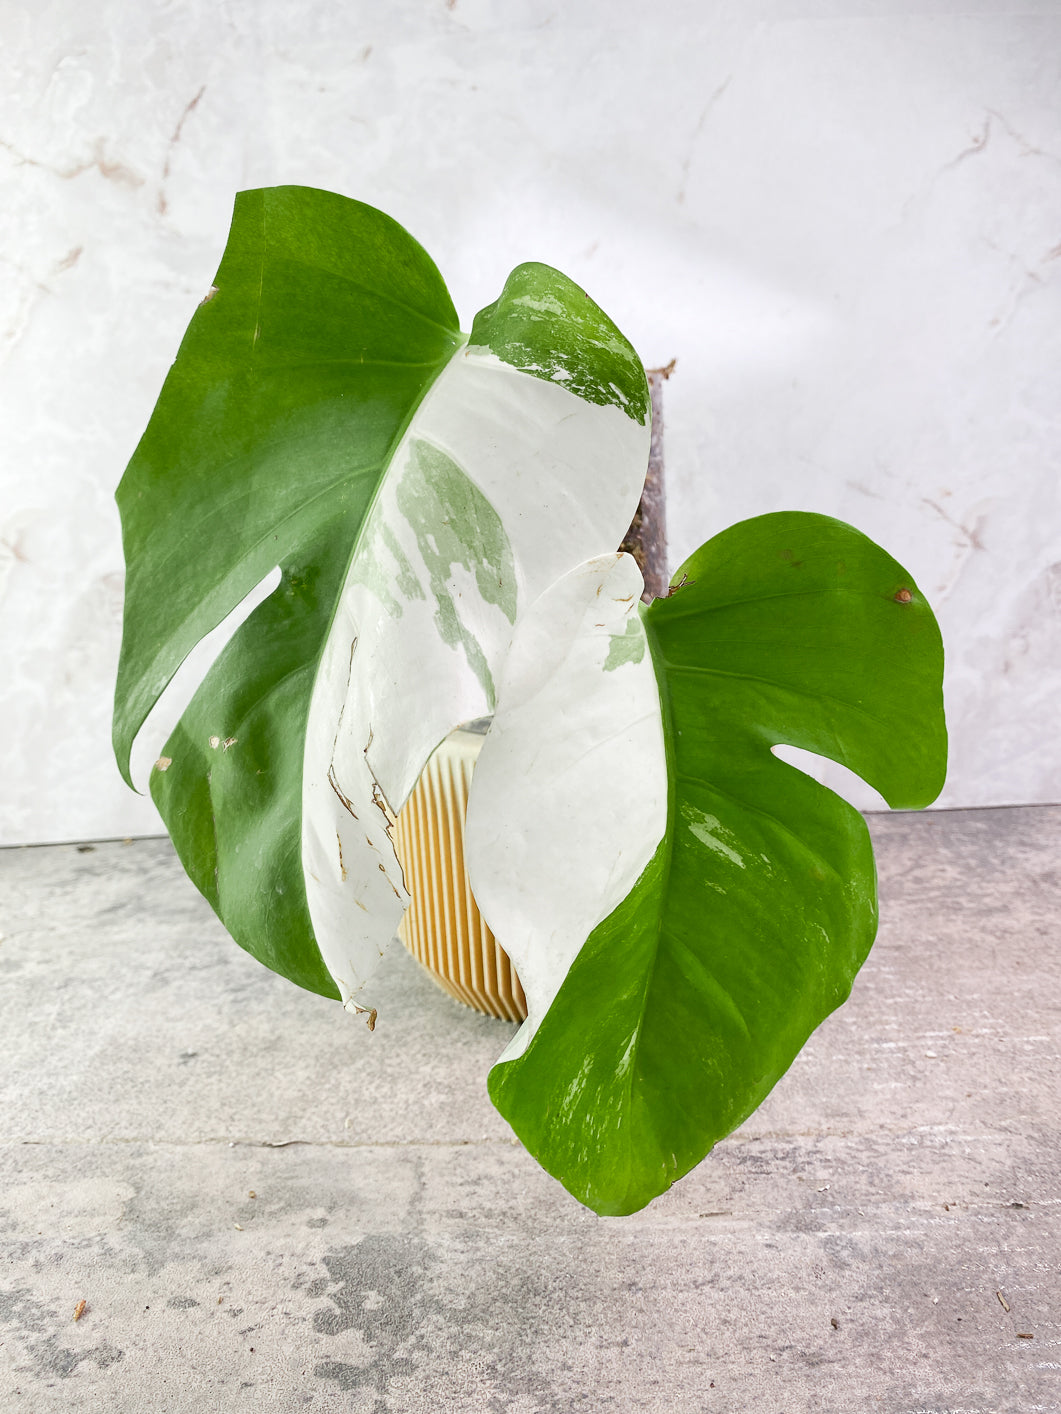 Monstera Albo Variegated 2 leaves Rooted include Moss-pole